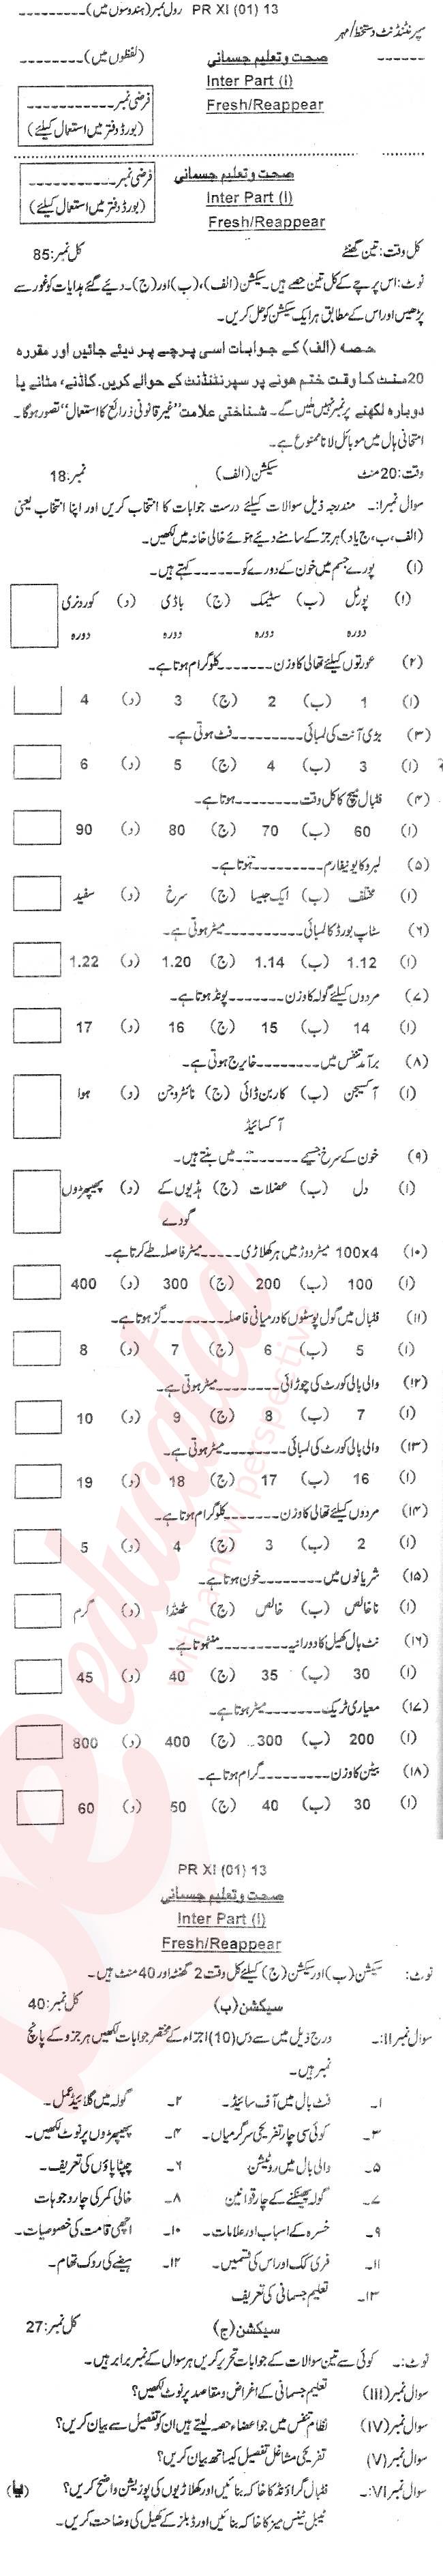 Health and Physical Education FA Part 1 Past Paper Group 1 BISE Peshawar 2013